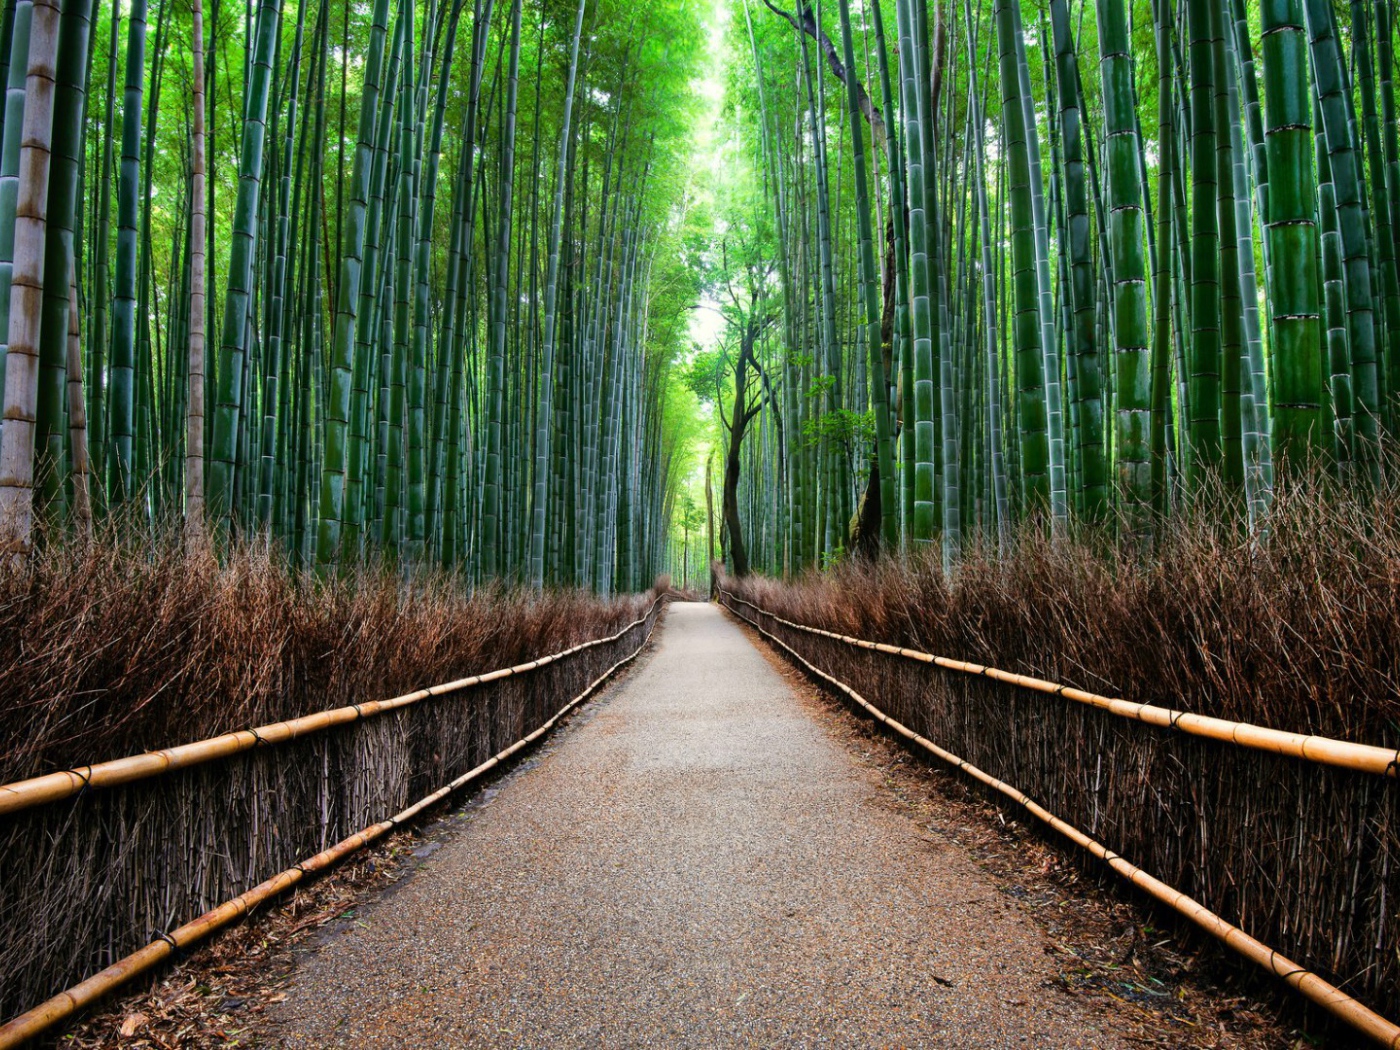 Sagano Bamboo Forest in Kyoto, Japan